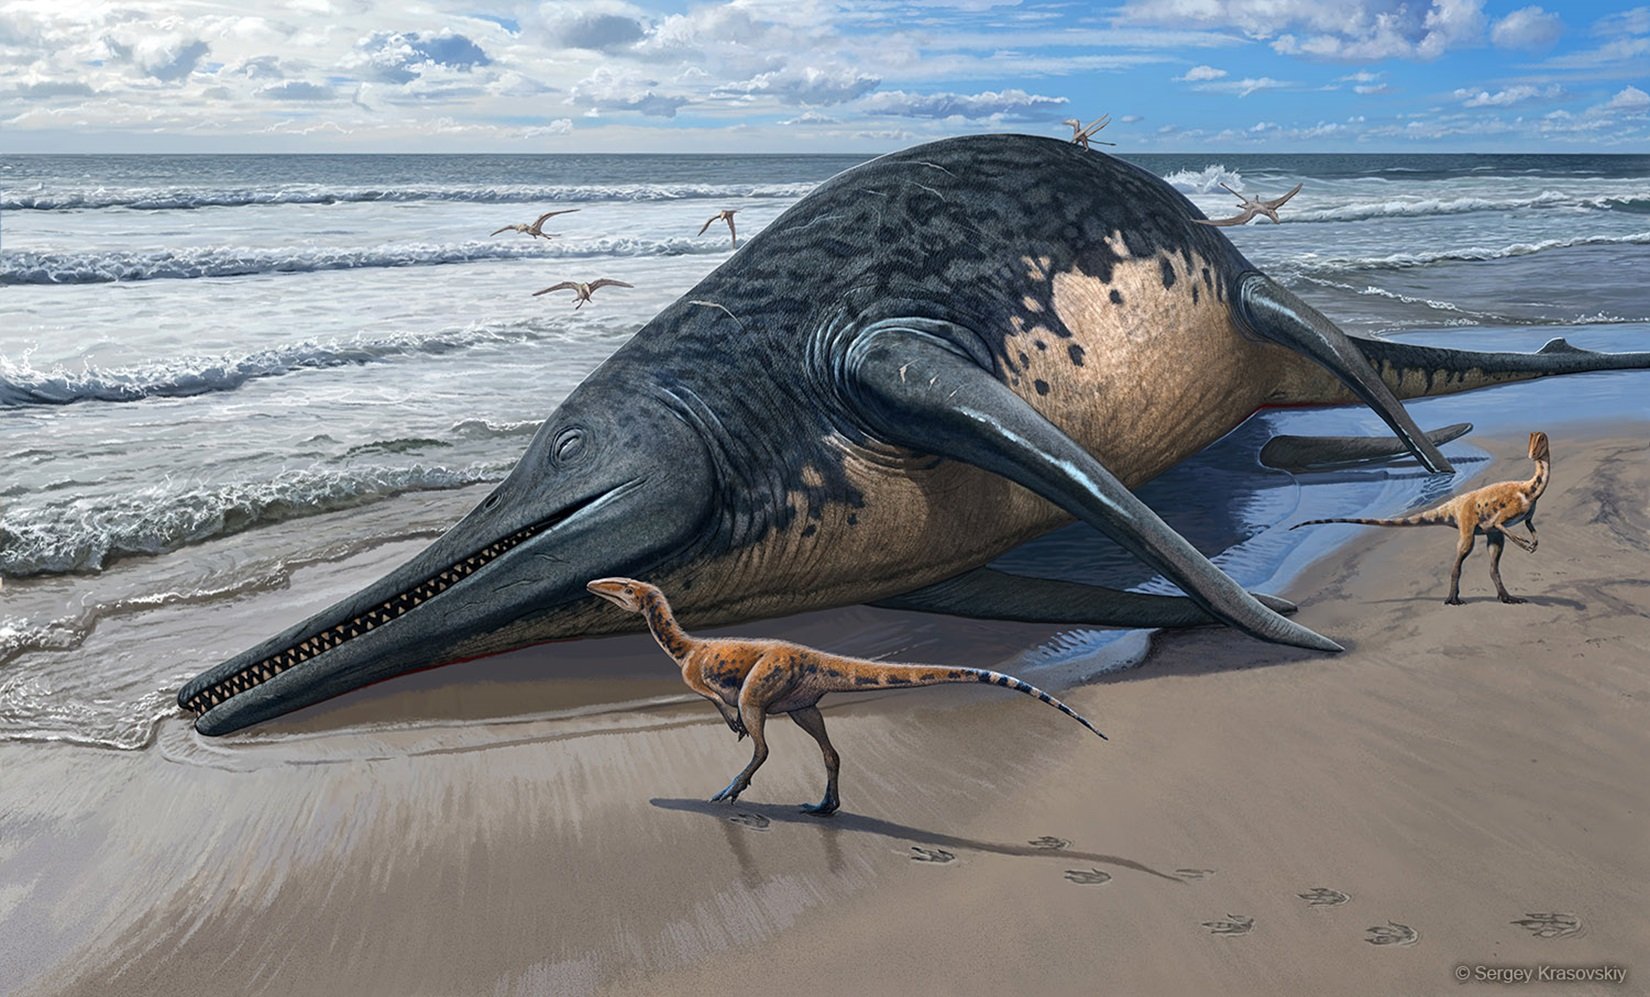 Giant Among Giants: Possibly the Largest Marine Reptile Ever Unearthed